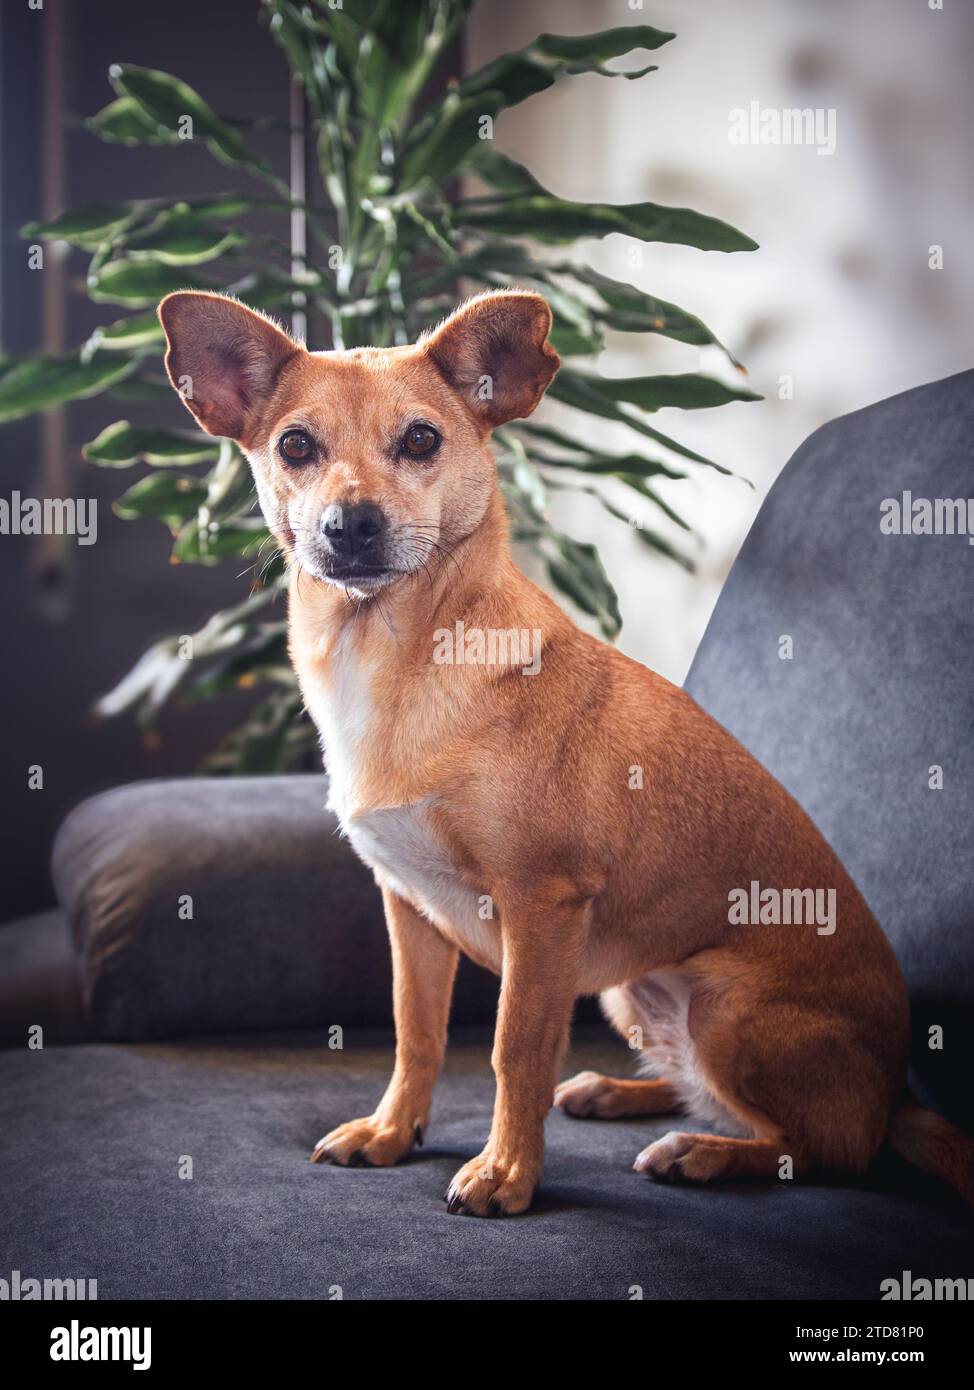 A serene mixed-breed dog poses on a comfortable grey sofa, gazing calmly at the camera on a blurred background featuring a large plant. Cozy ambiance Stock Photo